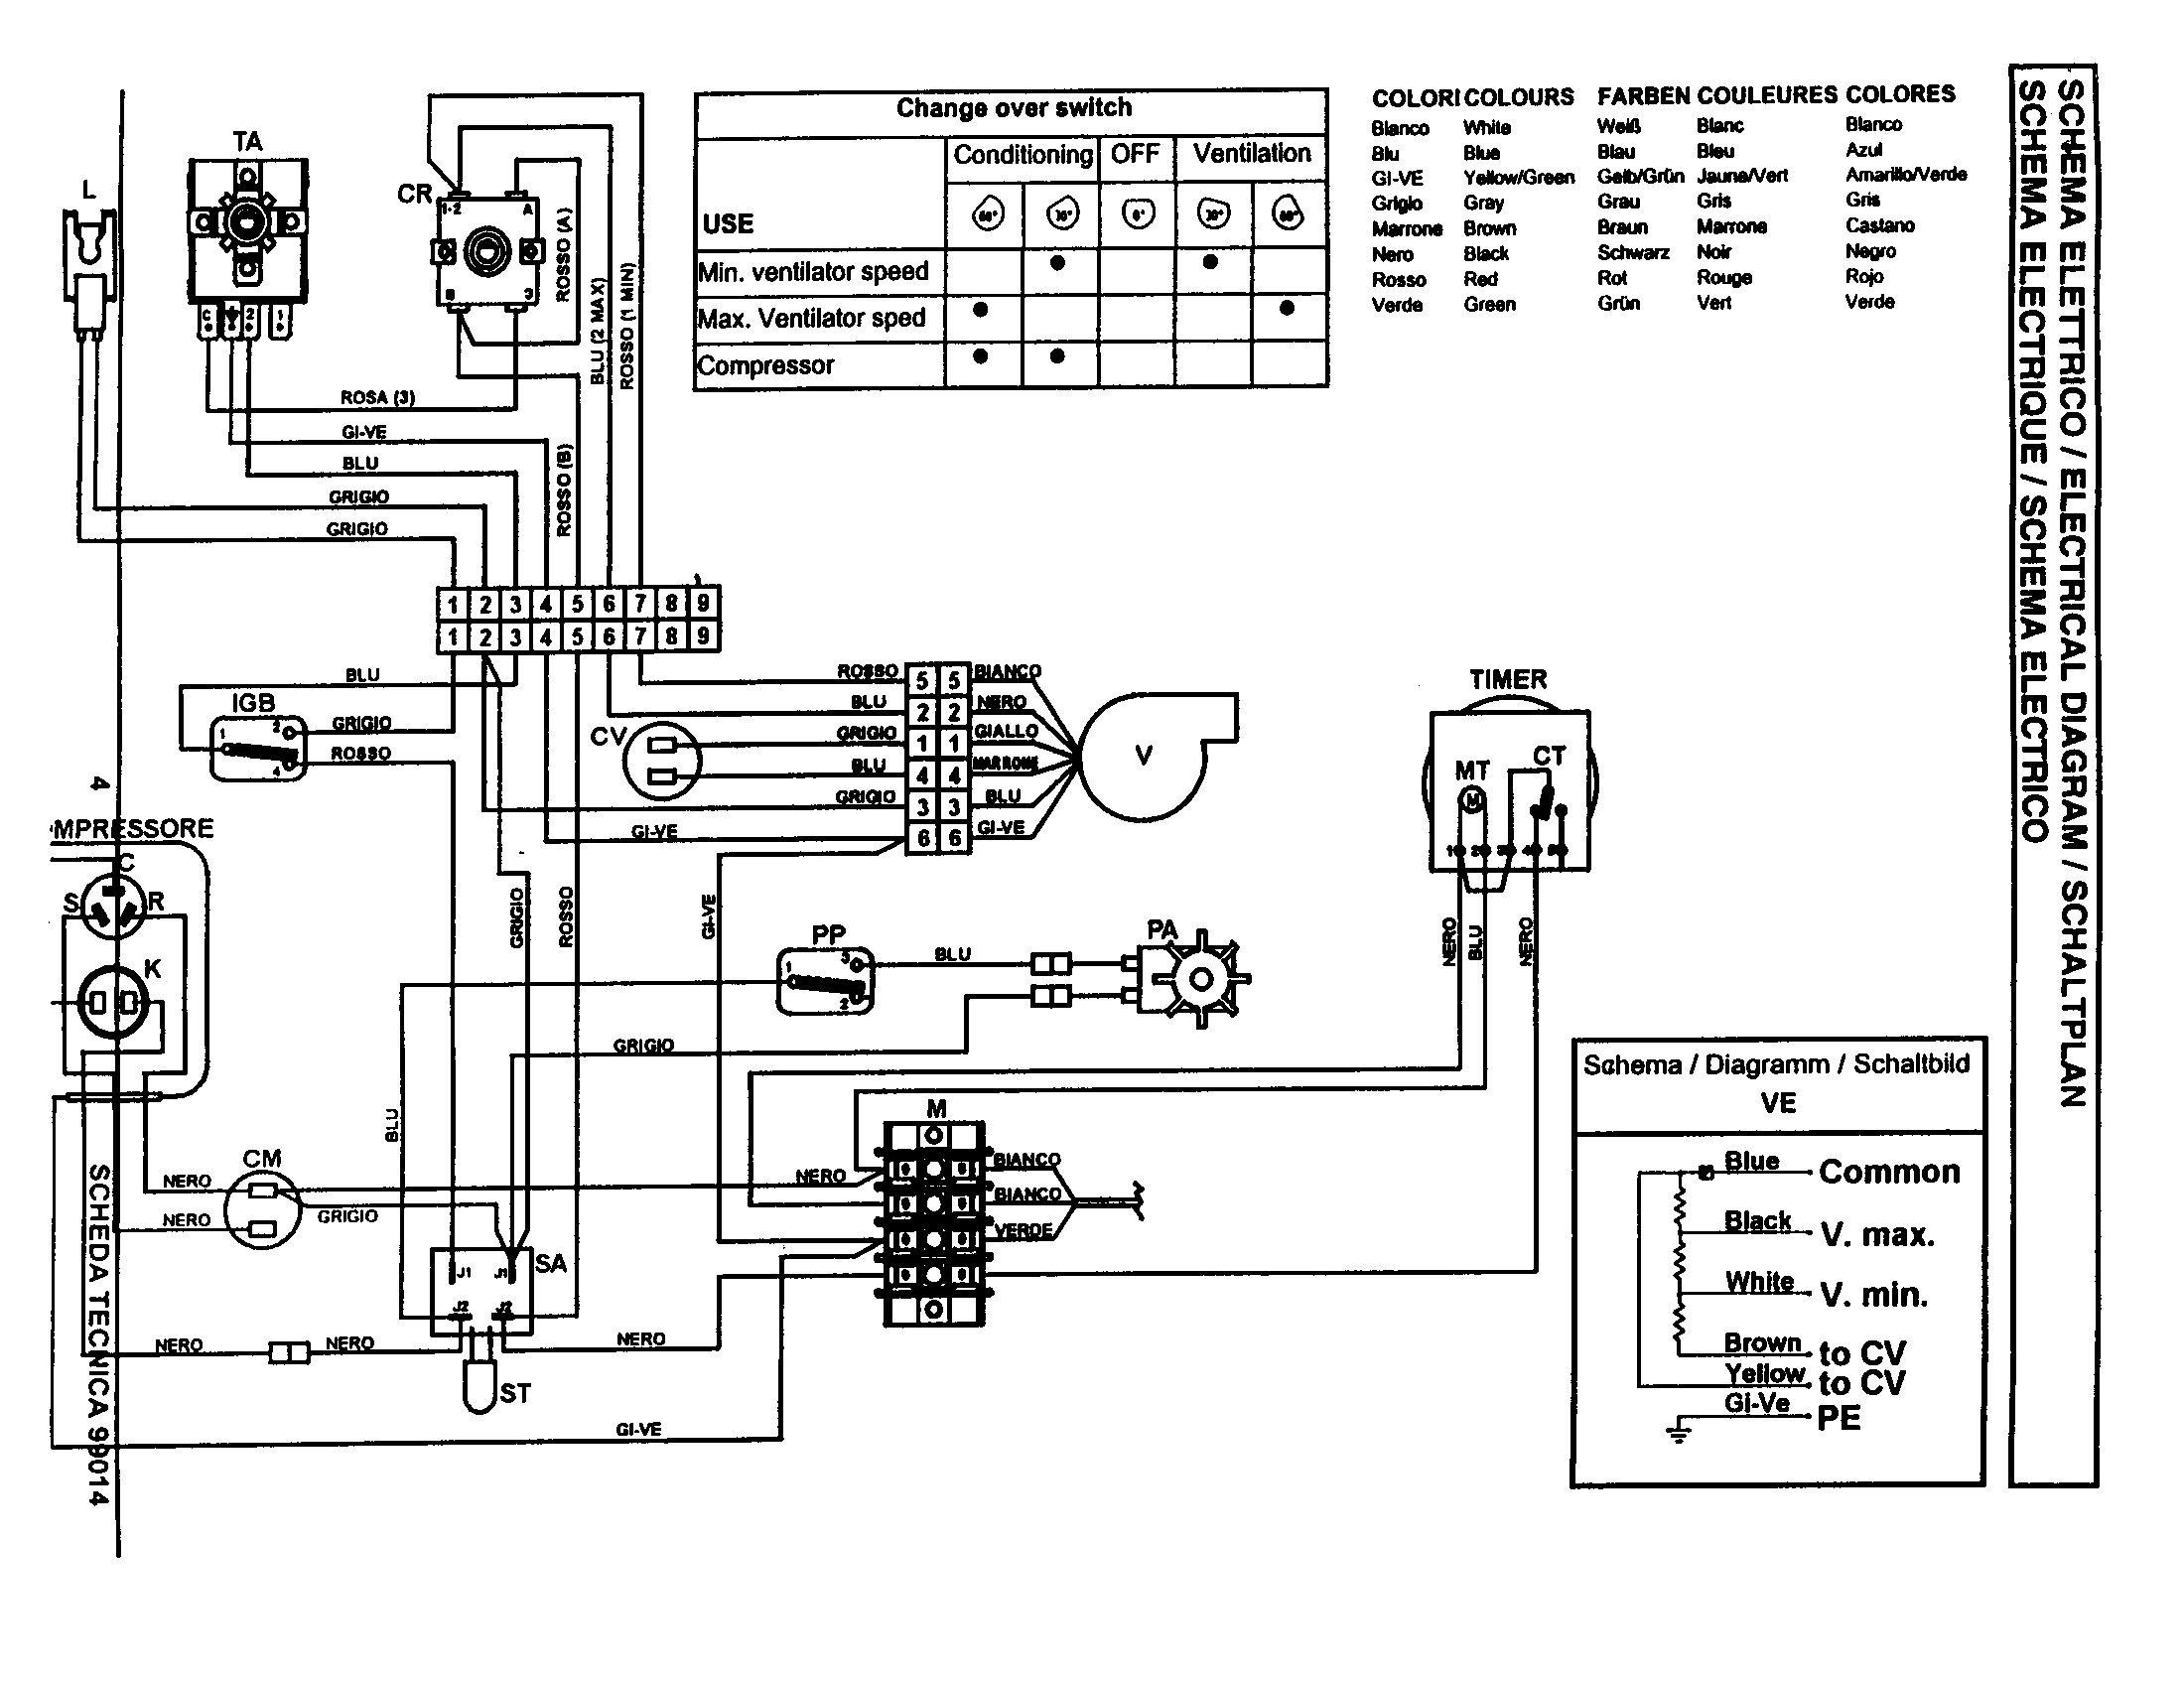 Intertherm Air Conditioner Wiring Diagram from c.searspartsdirect.com